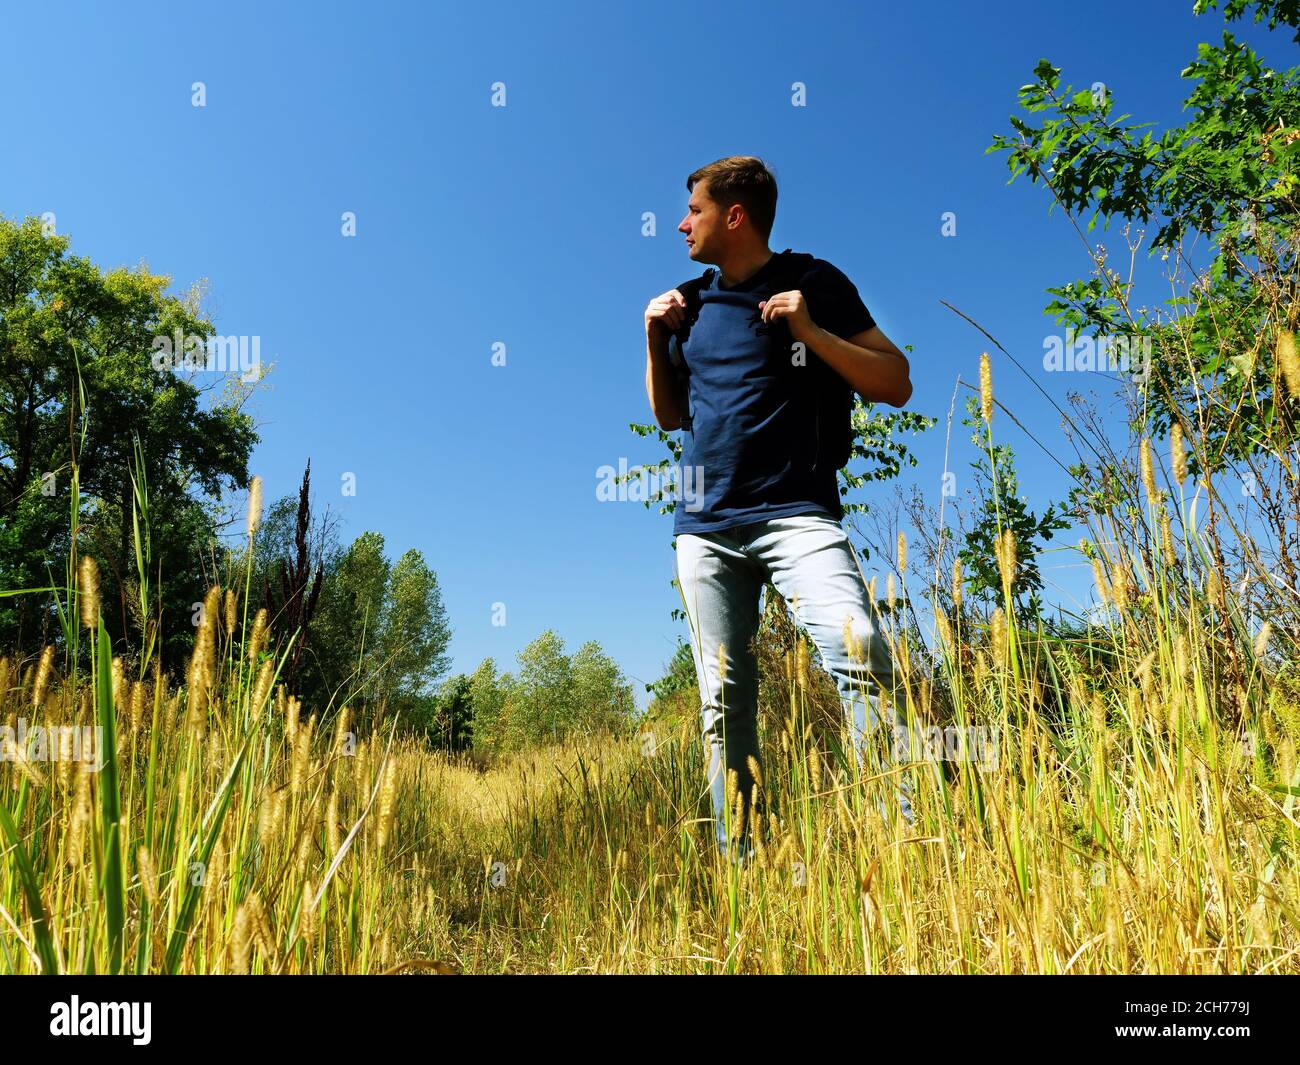 A man tourist with a backpack looks around while standing on a path in summer nature. Stock Photo